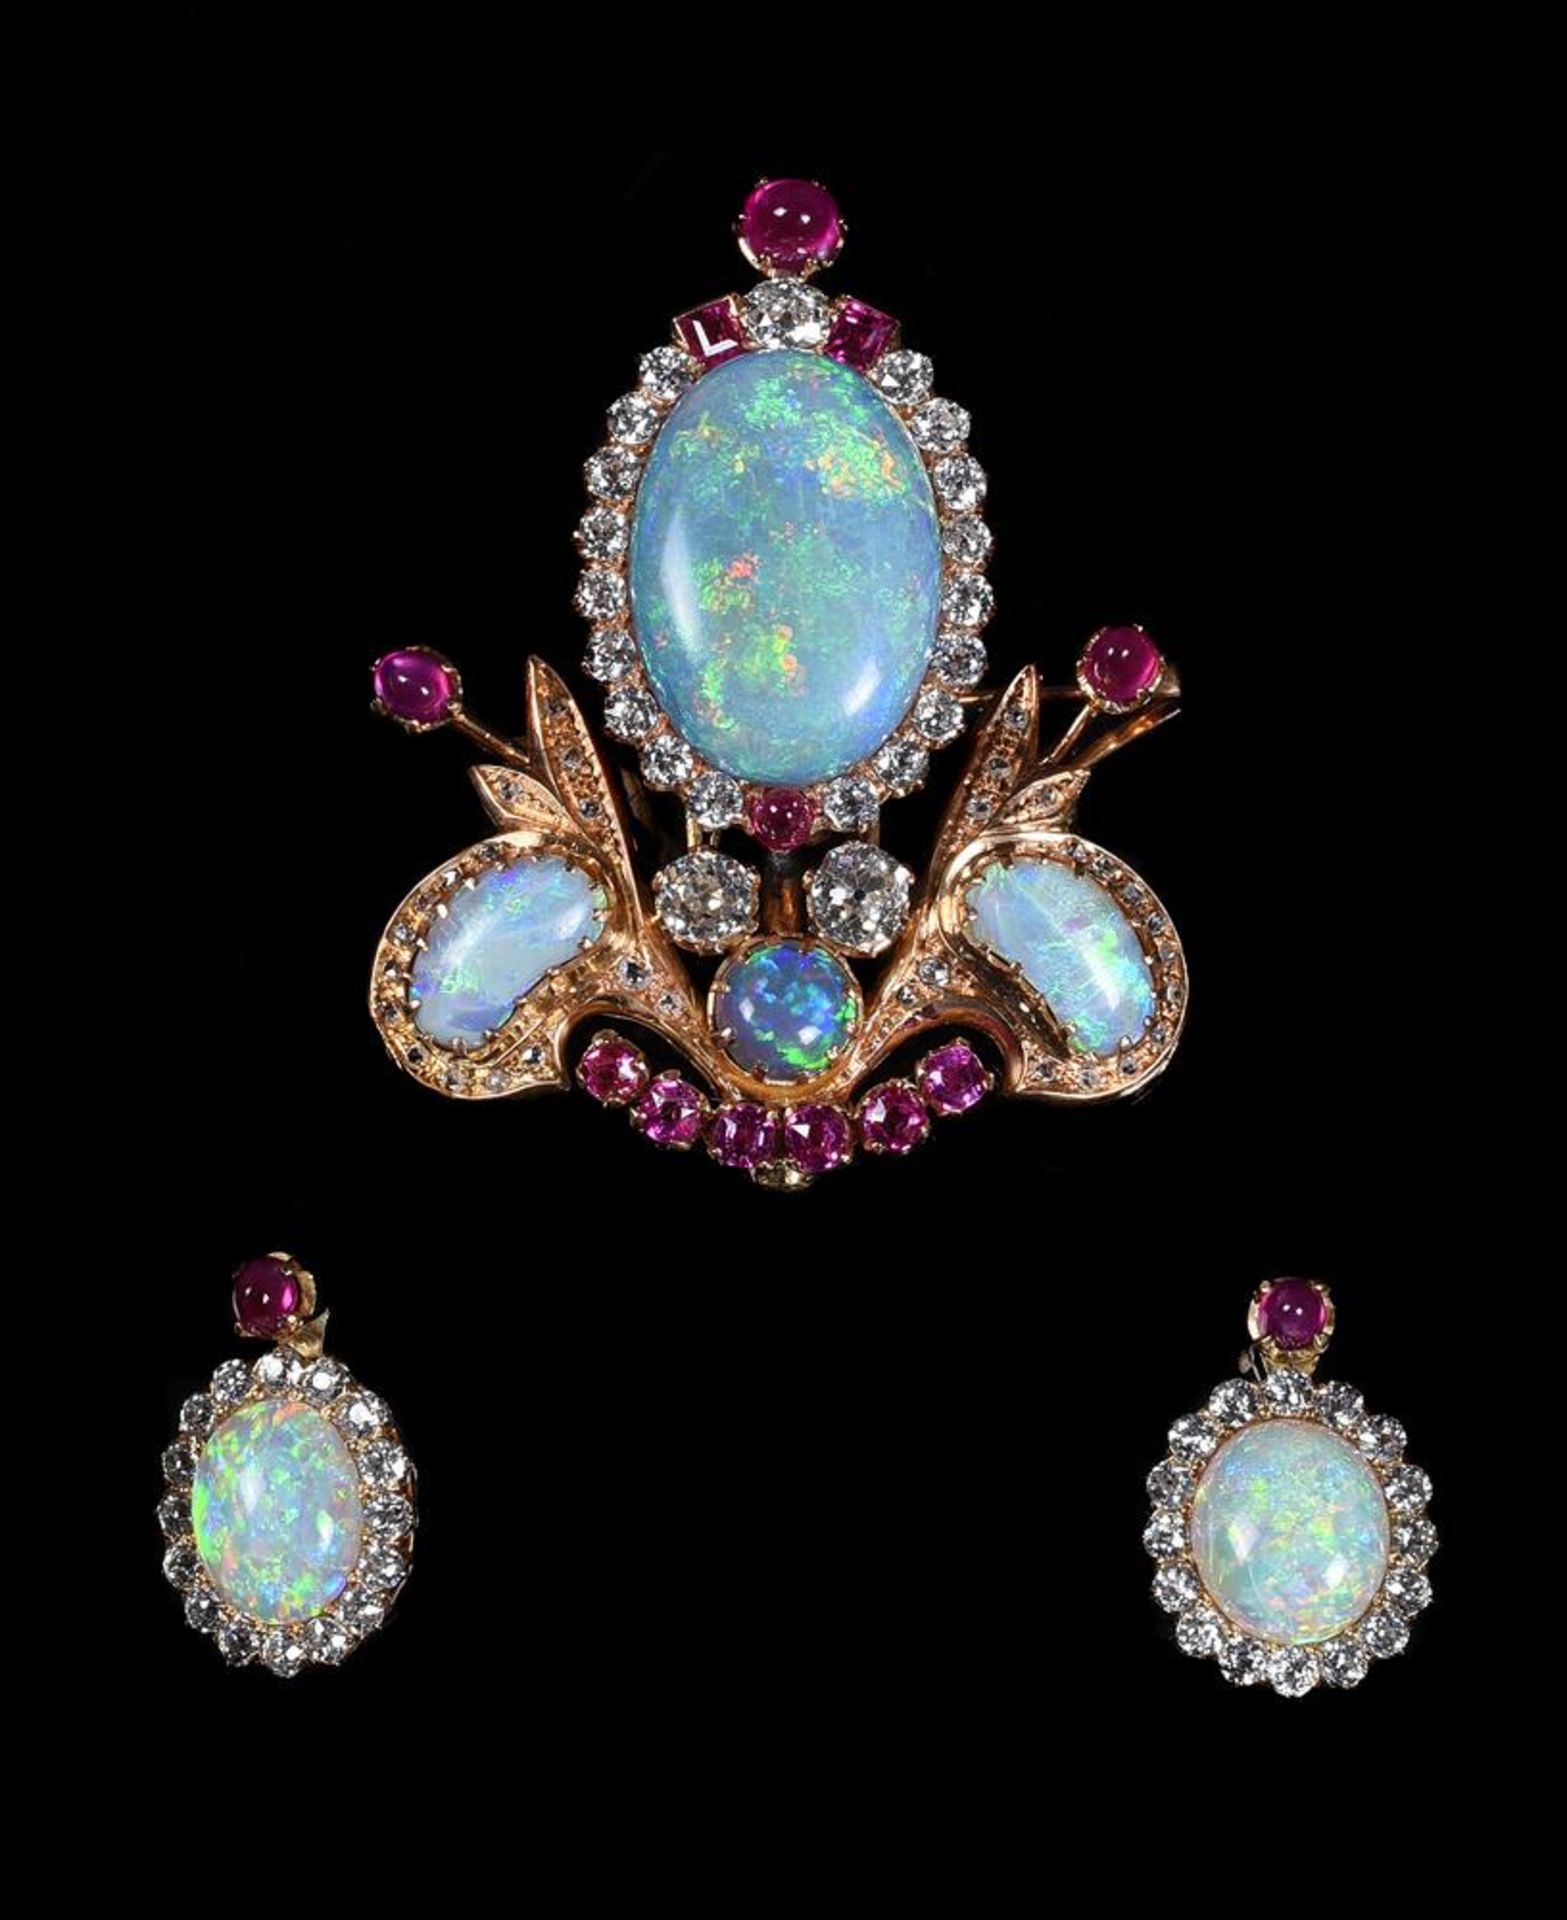 A MID 20TH CENTURY DIAMOND, OPAL, AND RUBY TIARA - Image 5 of 7